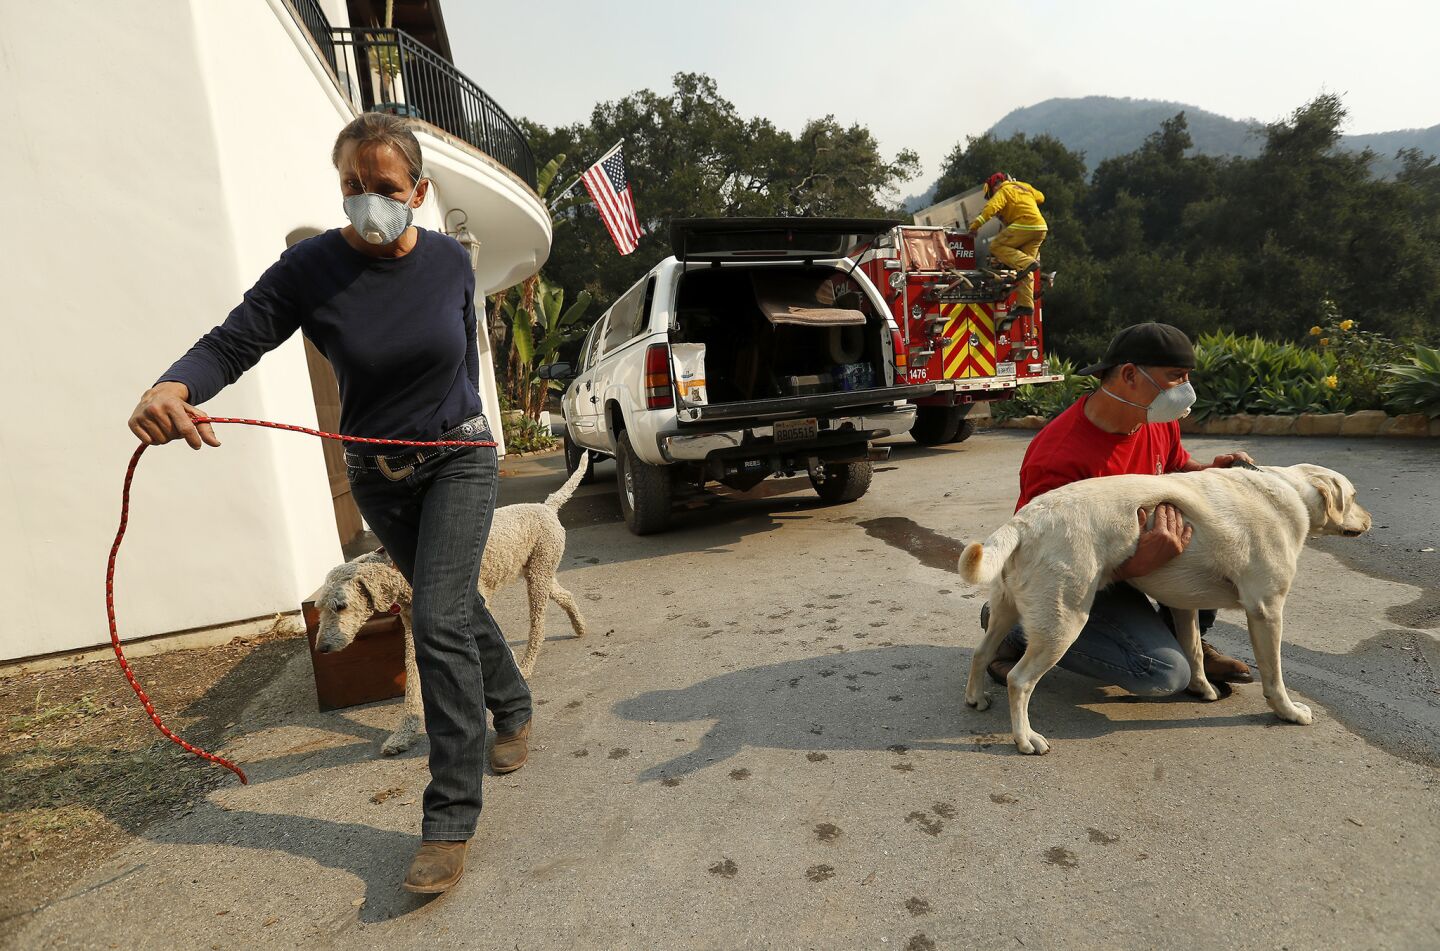 Mary McEwen and husband Dan Bellaart prepare to evacuate their home on Toro Canyon Road in Montecito as the Thomas fire burns.